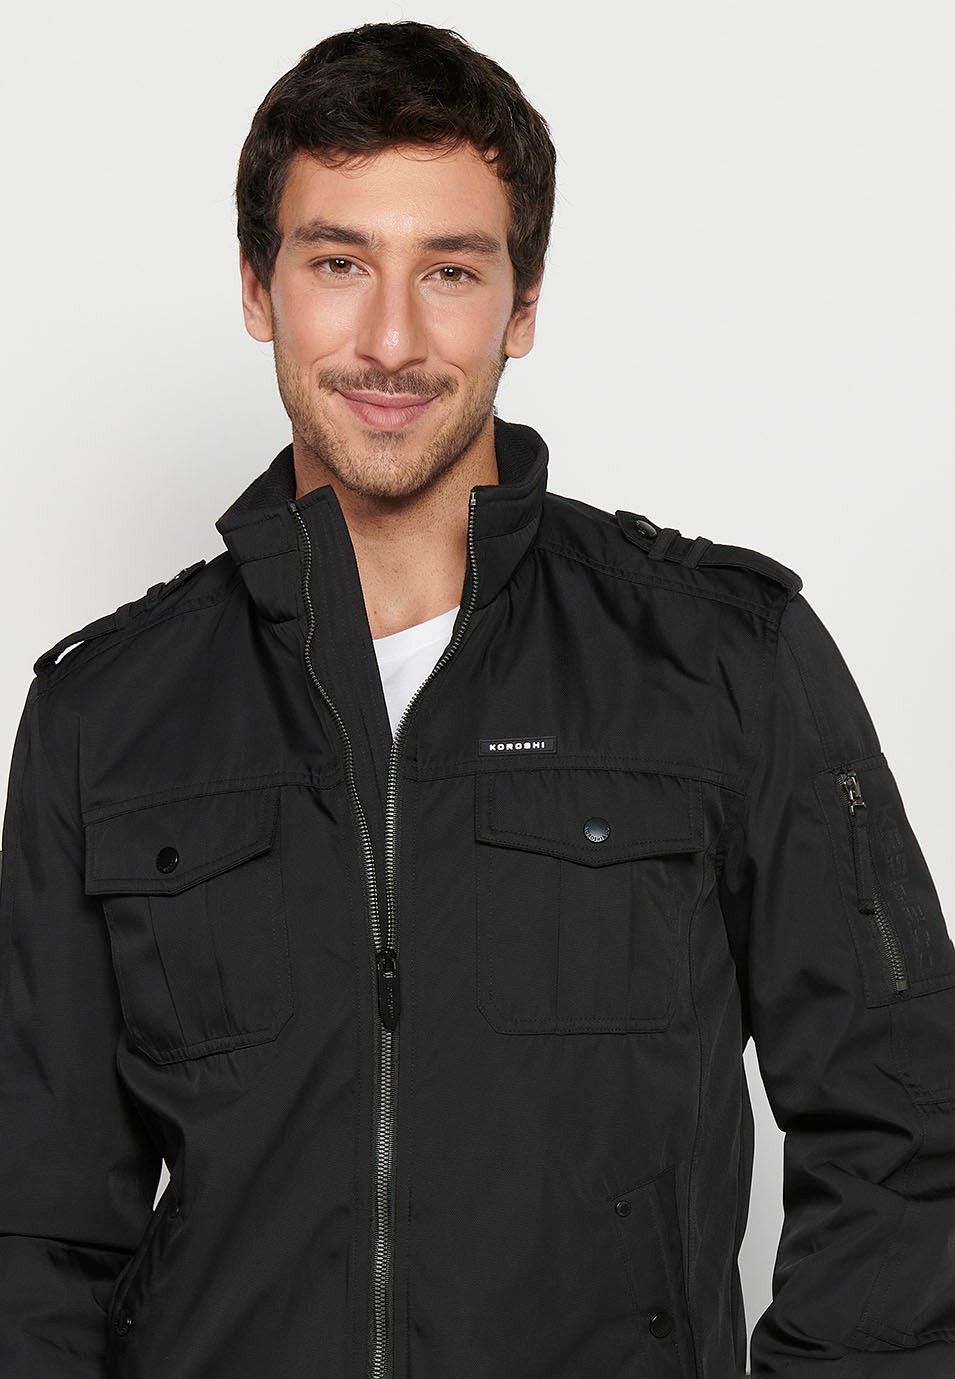 Black Long Sleeve Jacket with Round Neck and Front Zipper Closure with Flap Pockets for Men 10